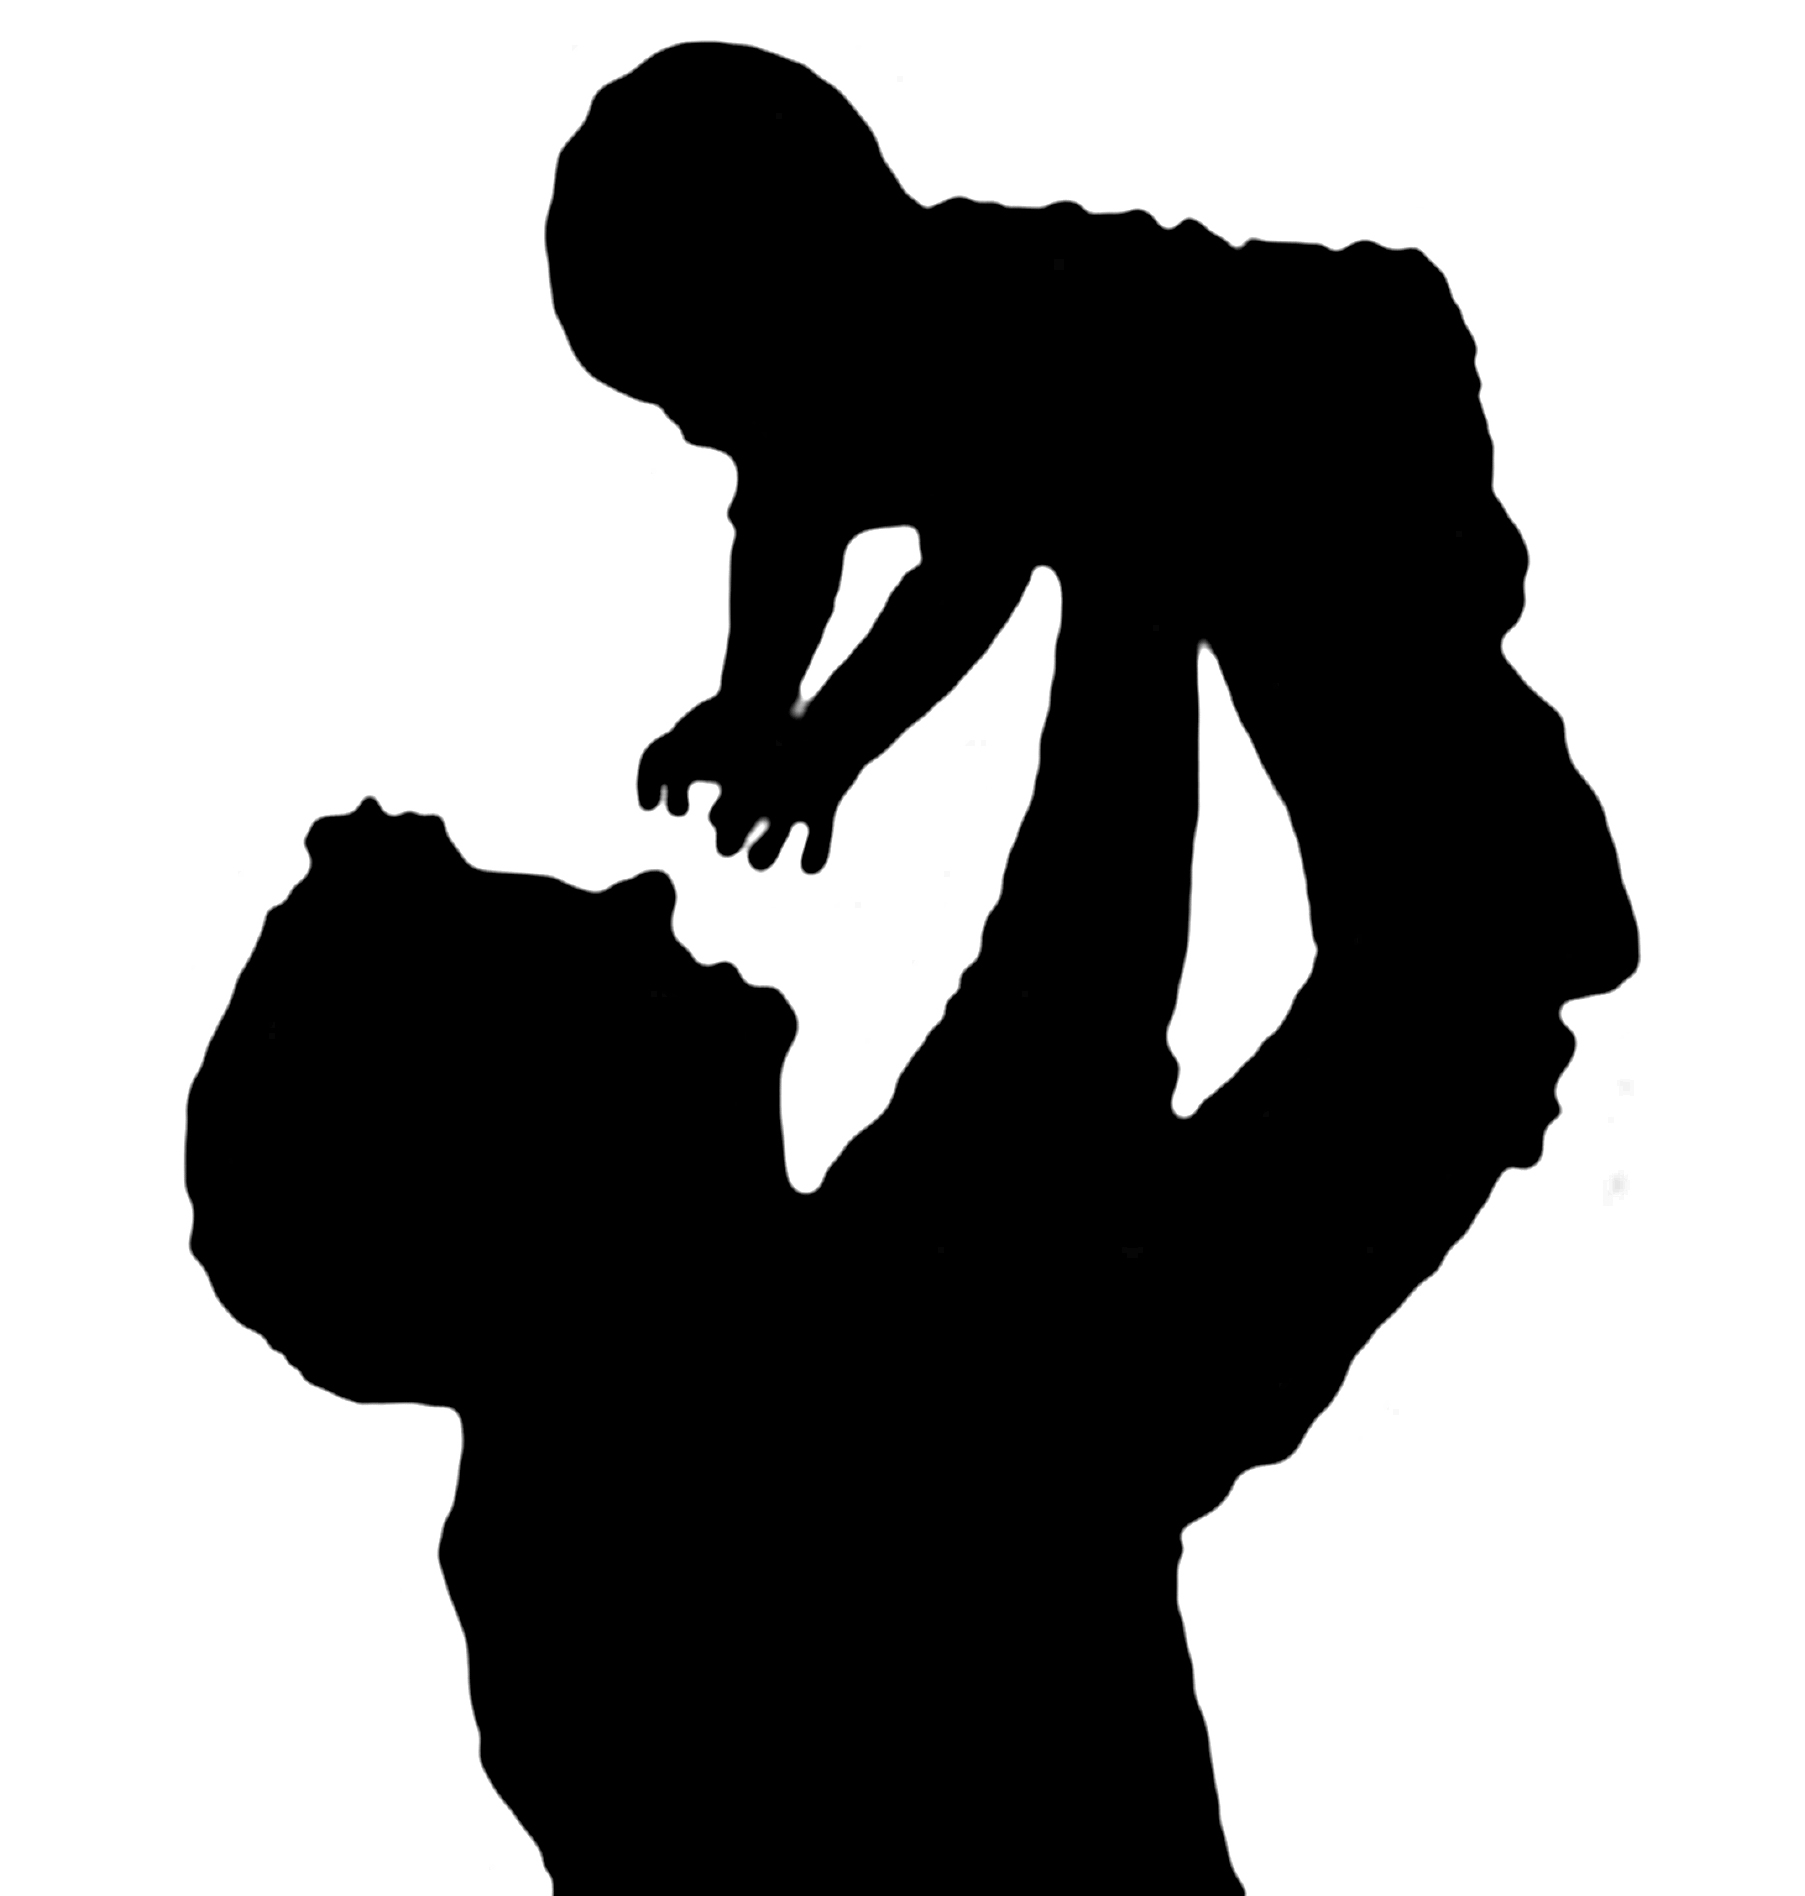 Silhouette of a father holding his child.